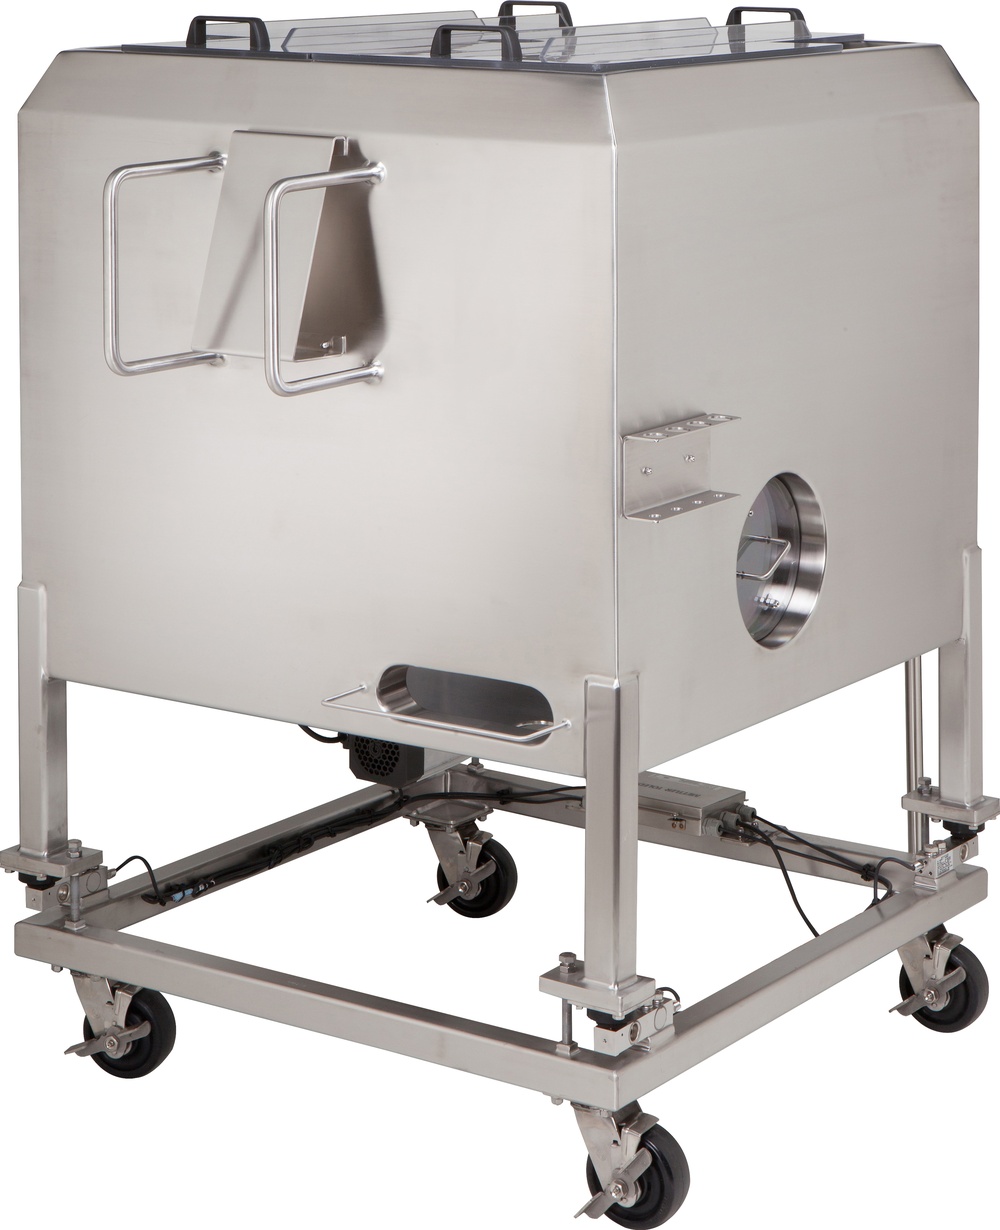 HOLLOWAY proudly produces pharmaceutical stainless steel solutions like this single use mixer.